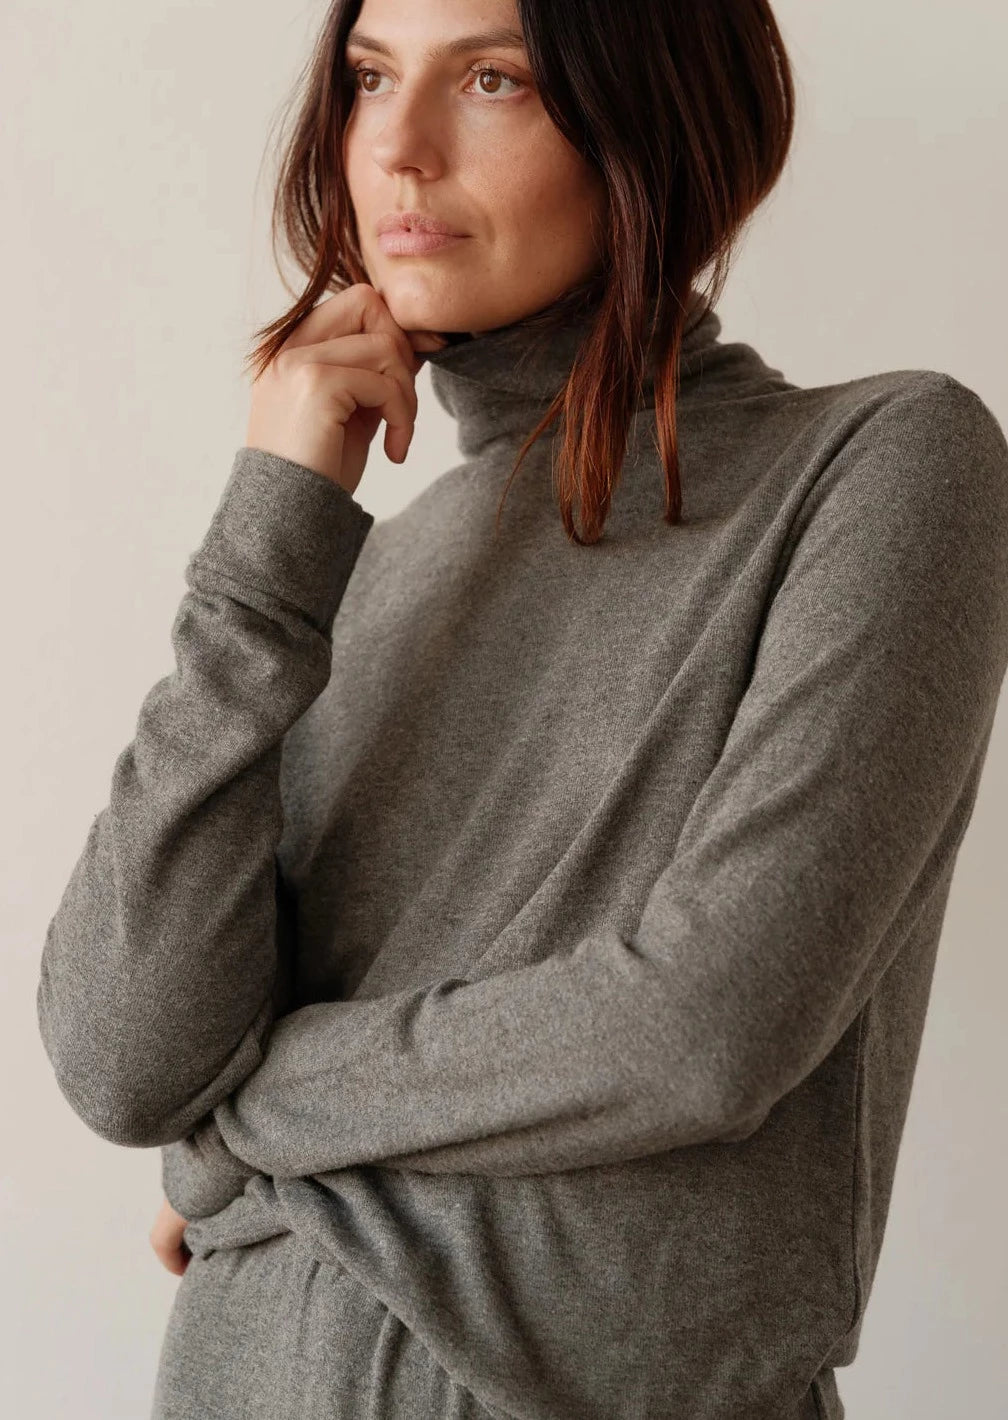 A close up shot of a female model posing while wearing the Sweater Turtleneck in Charcoal Grey